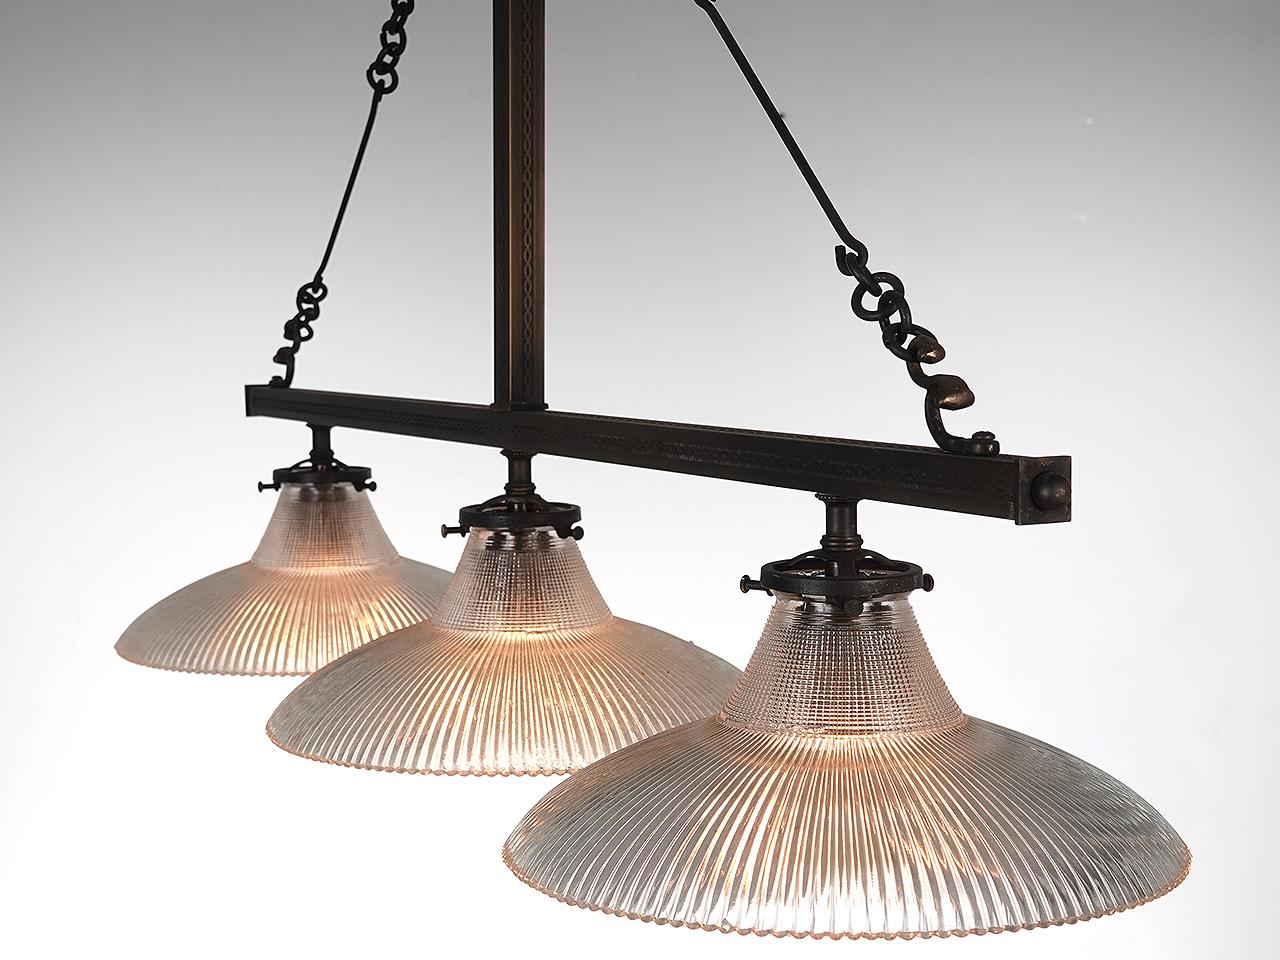 This is a nice light and airy triple chandelier. Its all brass with 3 prismatic prismatic dish shades. The detail is subtle featuring engraved or stamped decoration on the square tubing. It takes 3 standard bulbs and is perfect for a dinning room or